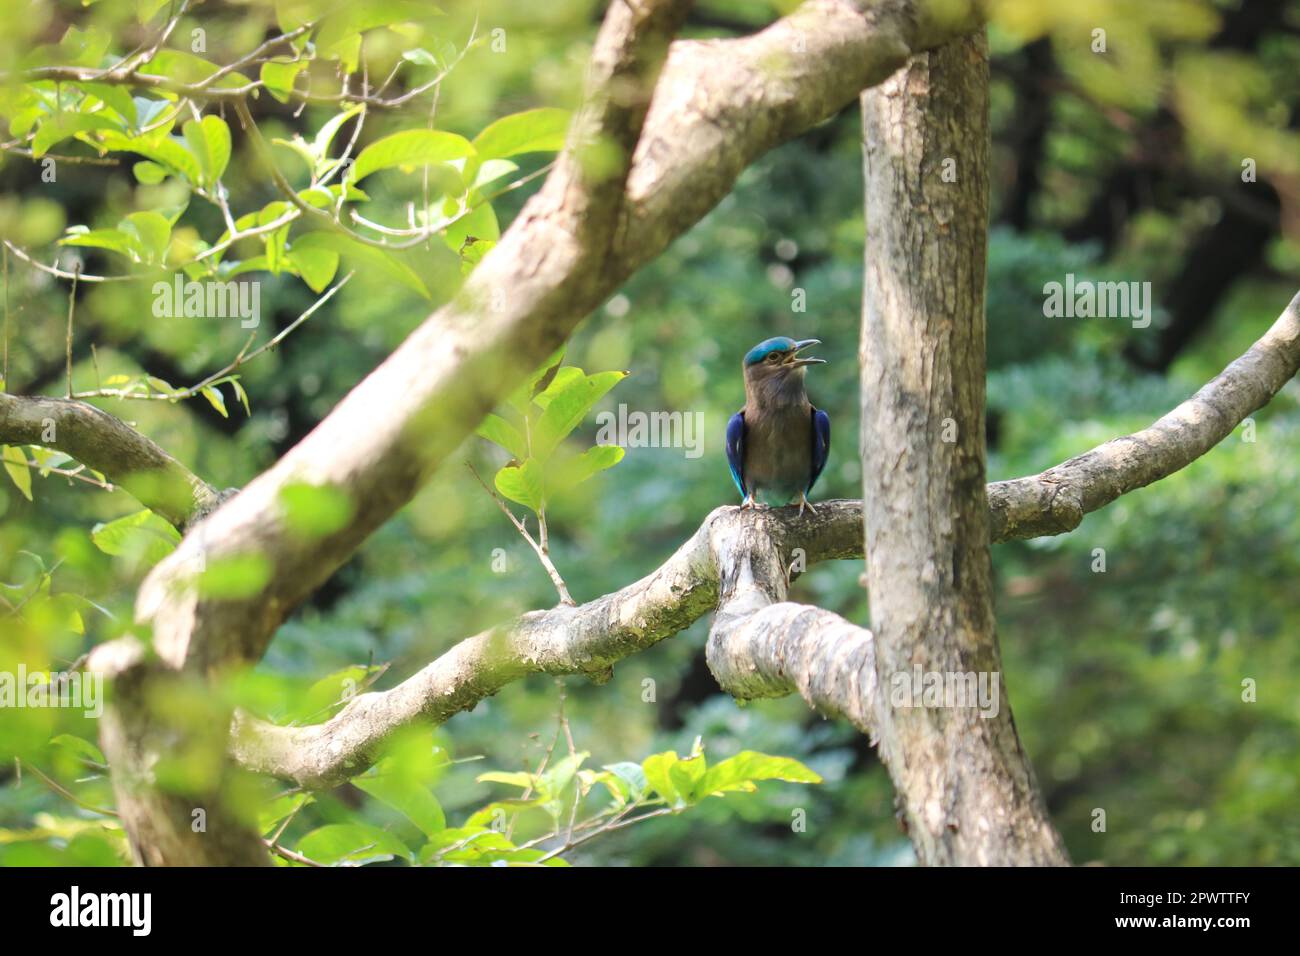 Burmese roller or The Indochinese roller (Coracias affinis) singing on a tree branch, Thailand. Stock Photo